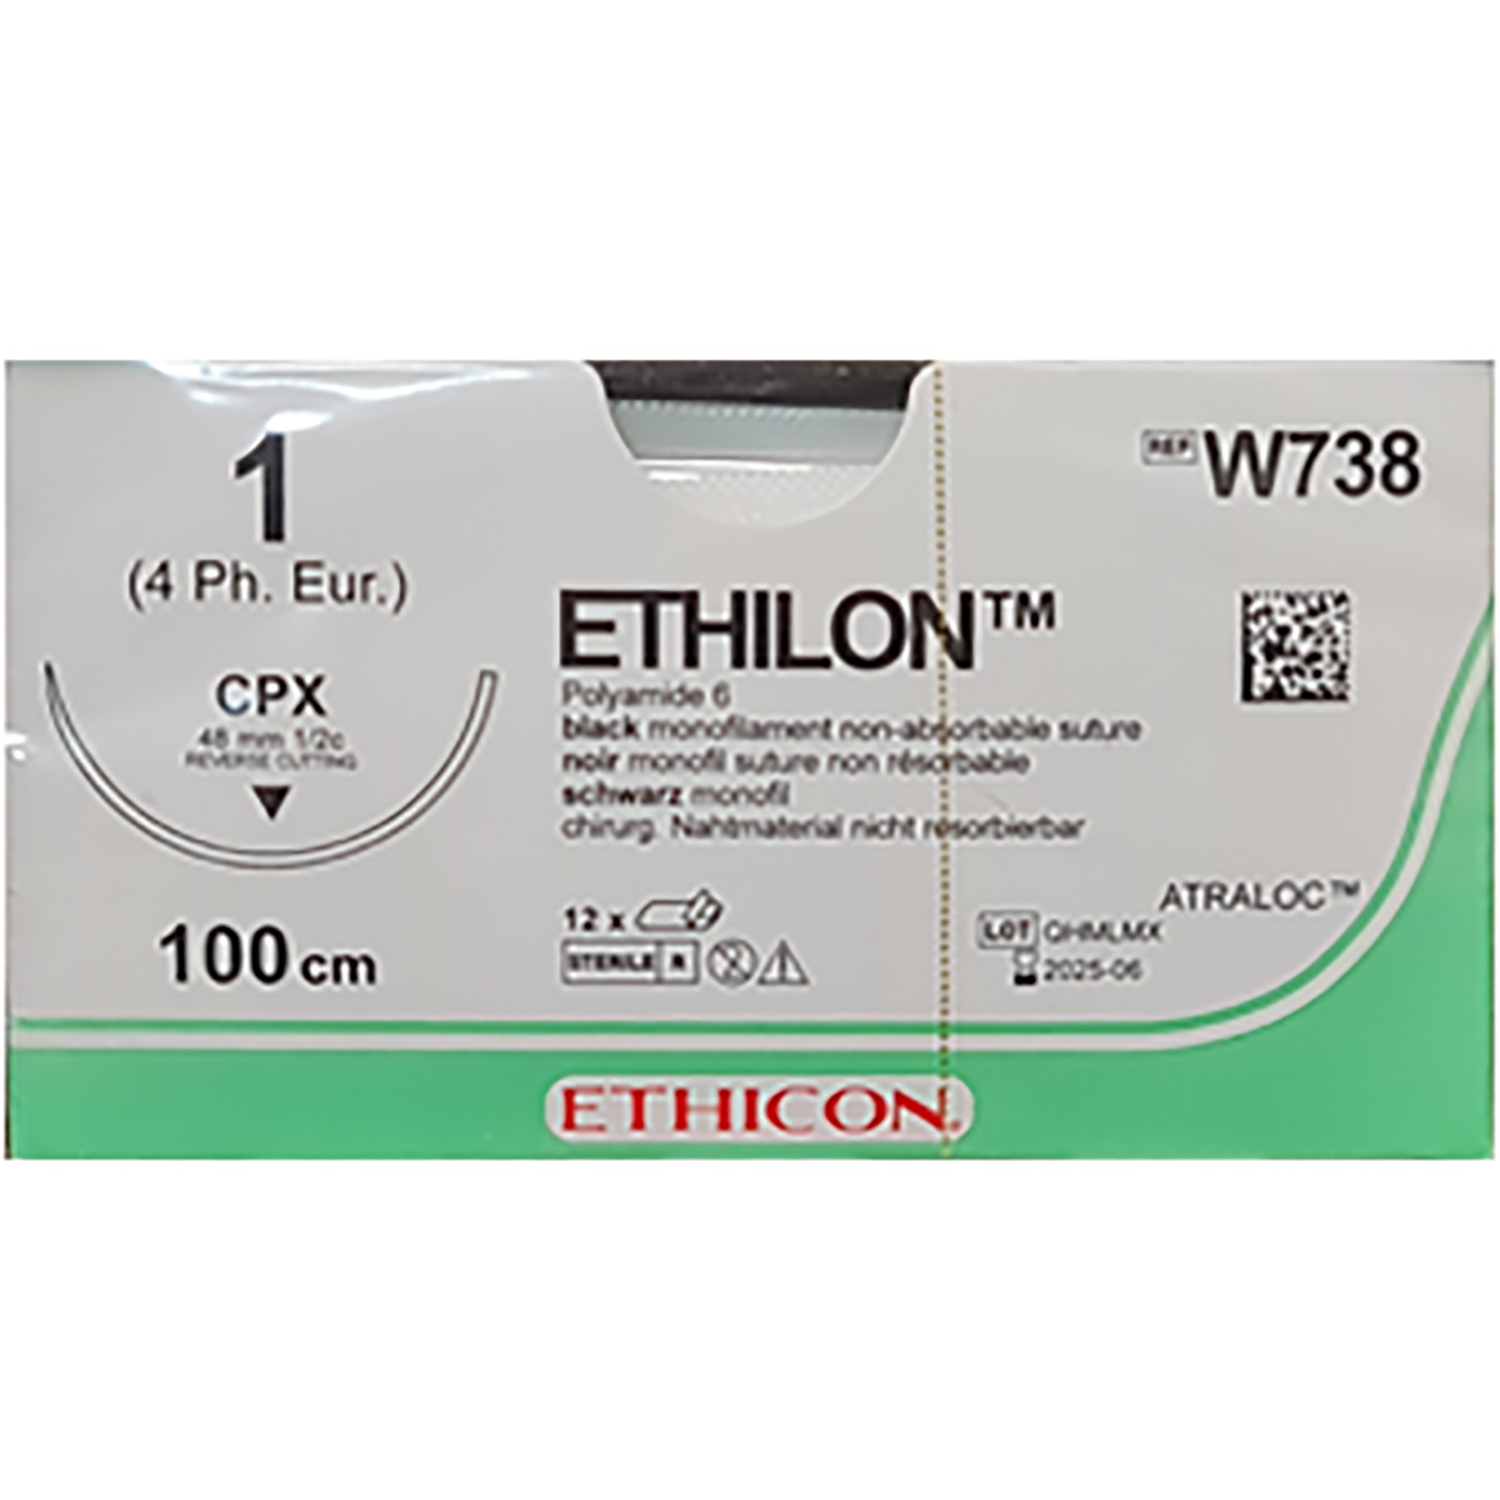 Ethicon Nylon Suture | Non Absorbable | Black | Size: 1 | Length: 100 | Needle: CPX | Pack of 12